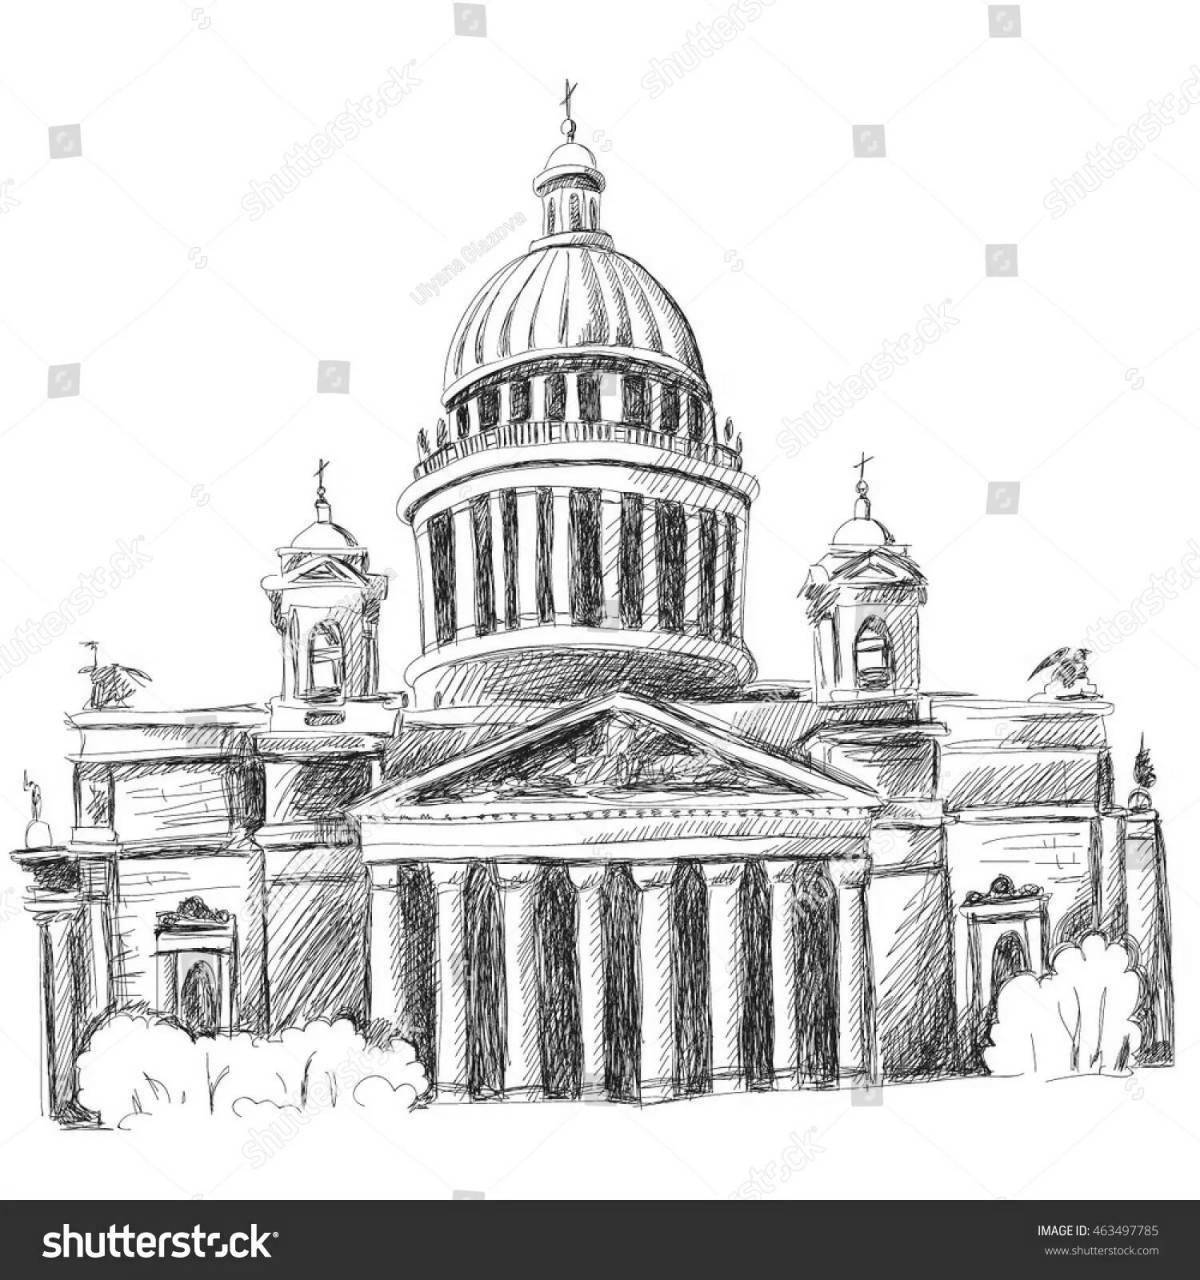 Colouring St. Isaac's Cathedral in the radiance